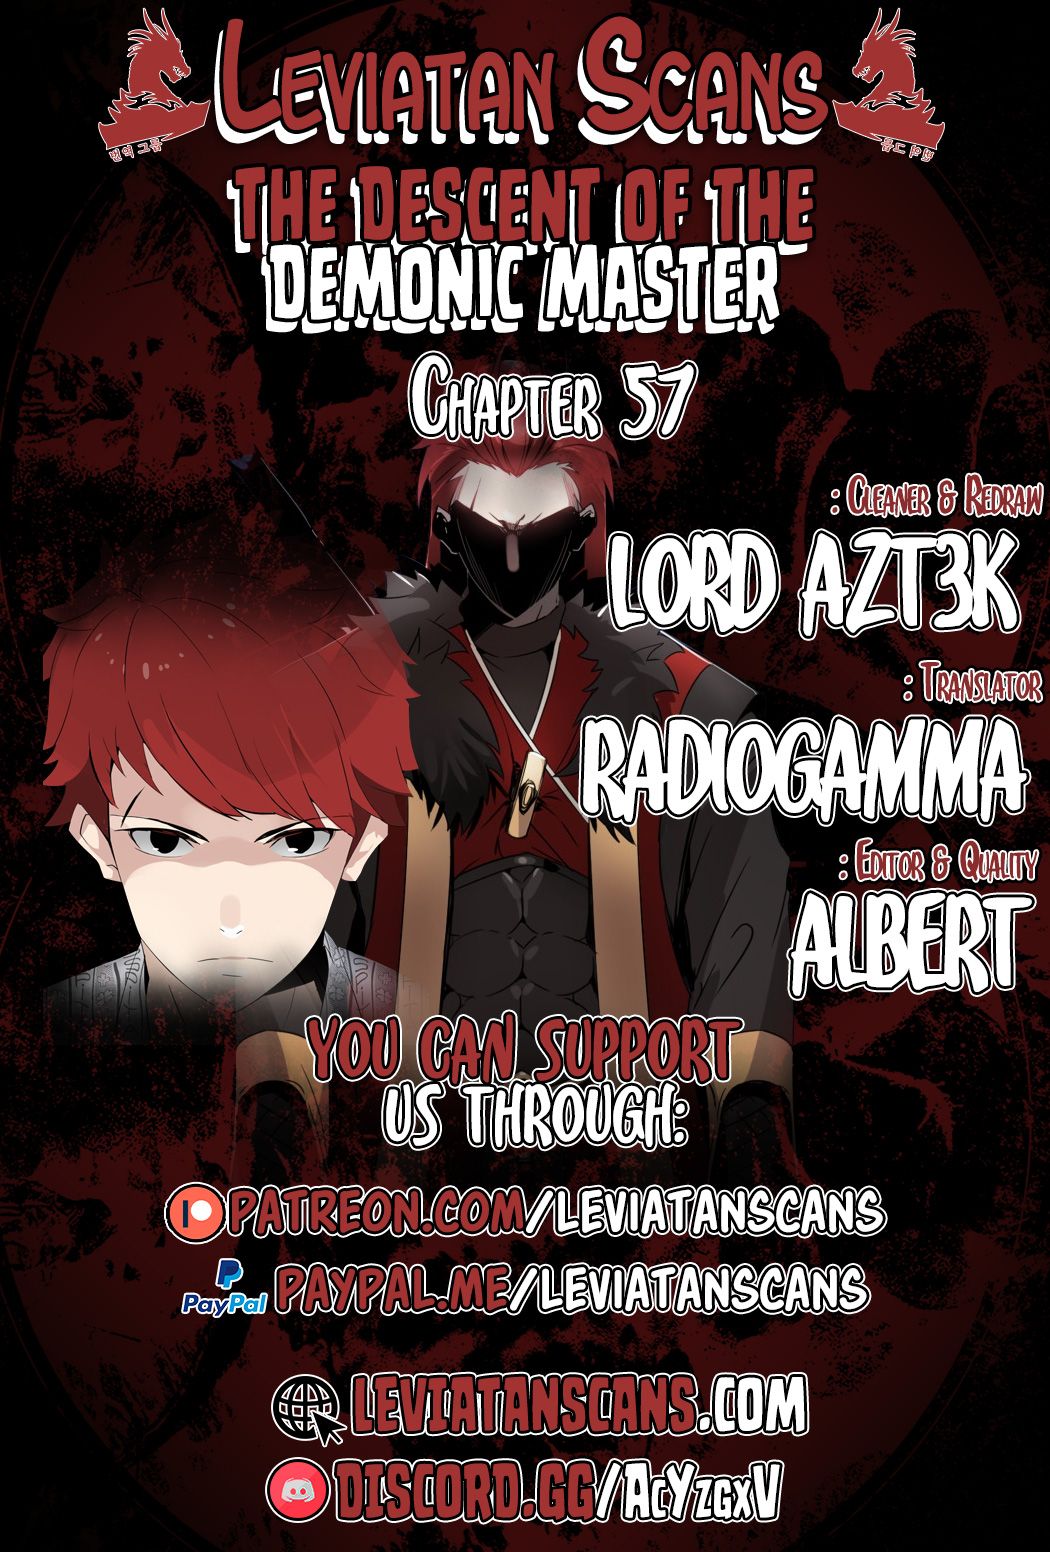 The Descent of the Demonic Master 57 (1)